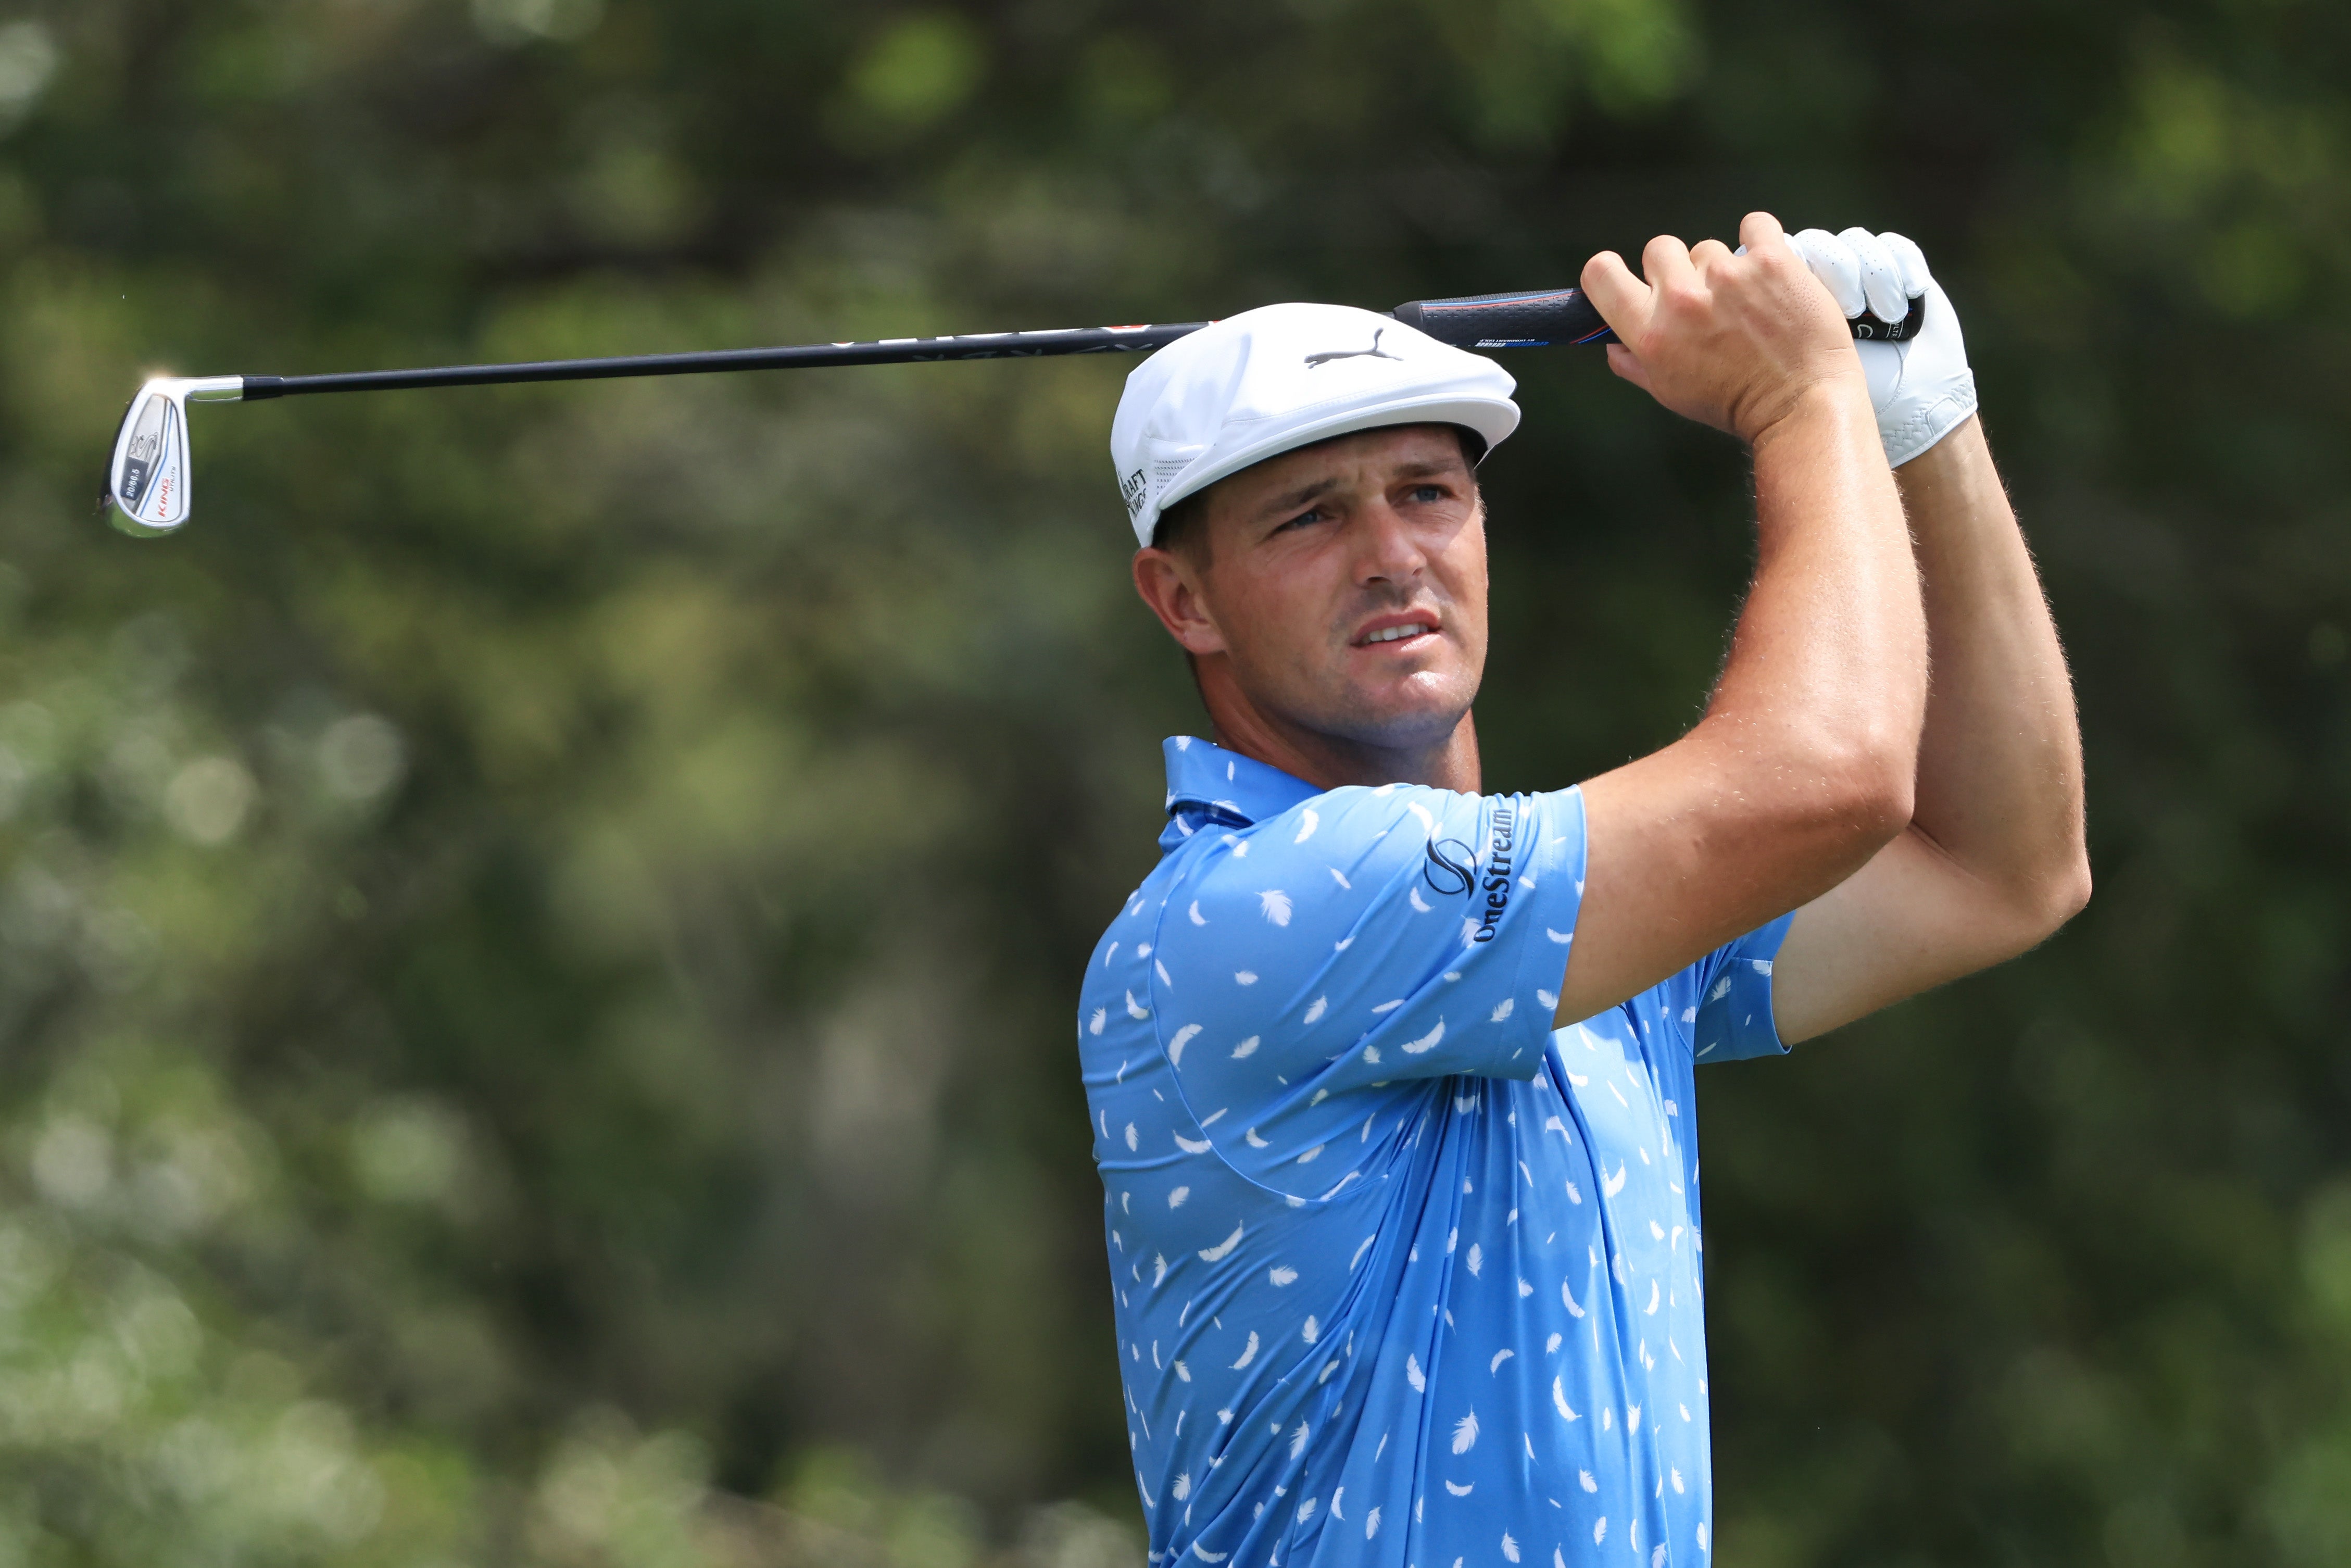 Bryson DeChambeau has been selected as part of USA’s Ryder Cup team